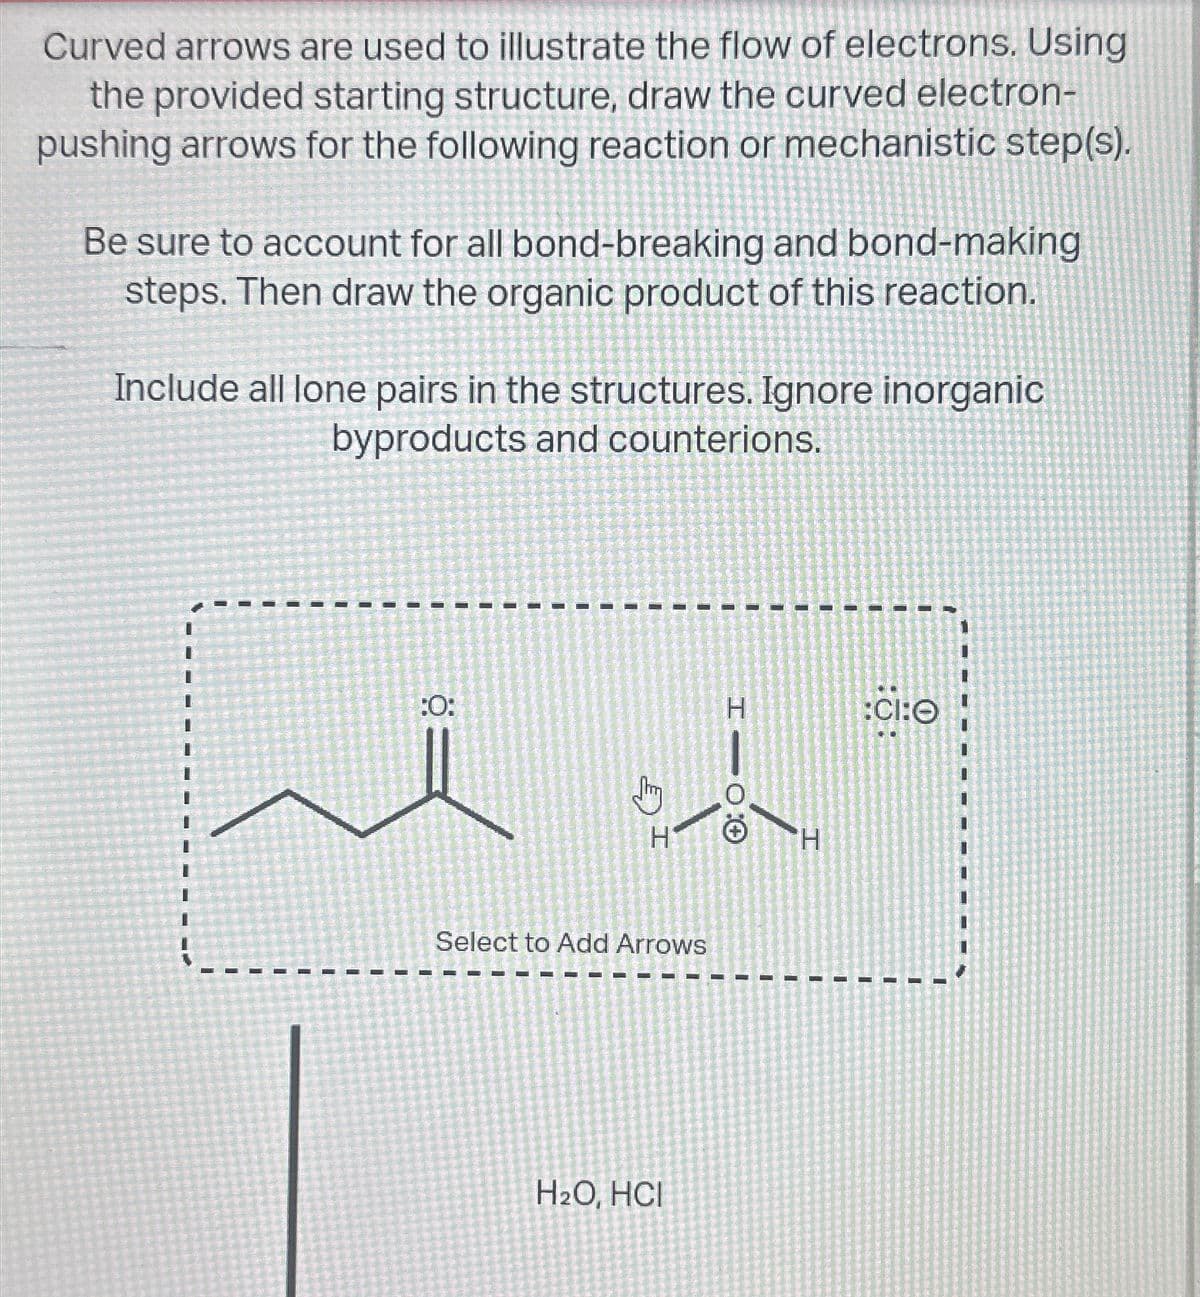 Curved arrows are used to illustrate the flow of electrons. Using
the provided starting structure, draw the curved electron-
pushing arrows for the following reaction or mechanistic step(s).
Be sure to account for all bond-breaking and bond-making
steps. Then draw the organic product of this reaction.
Include all lone pairs in the structures. Ignore inorganic
byproducts and counterions.
:0:
I
I
H
I
I
-
+ O
Select to Add Arrows
H2O, HCI
H
:CI:O
I
I